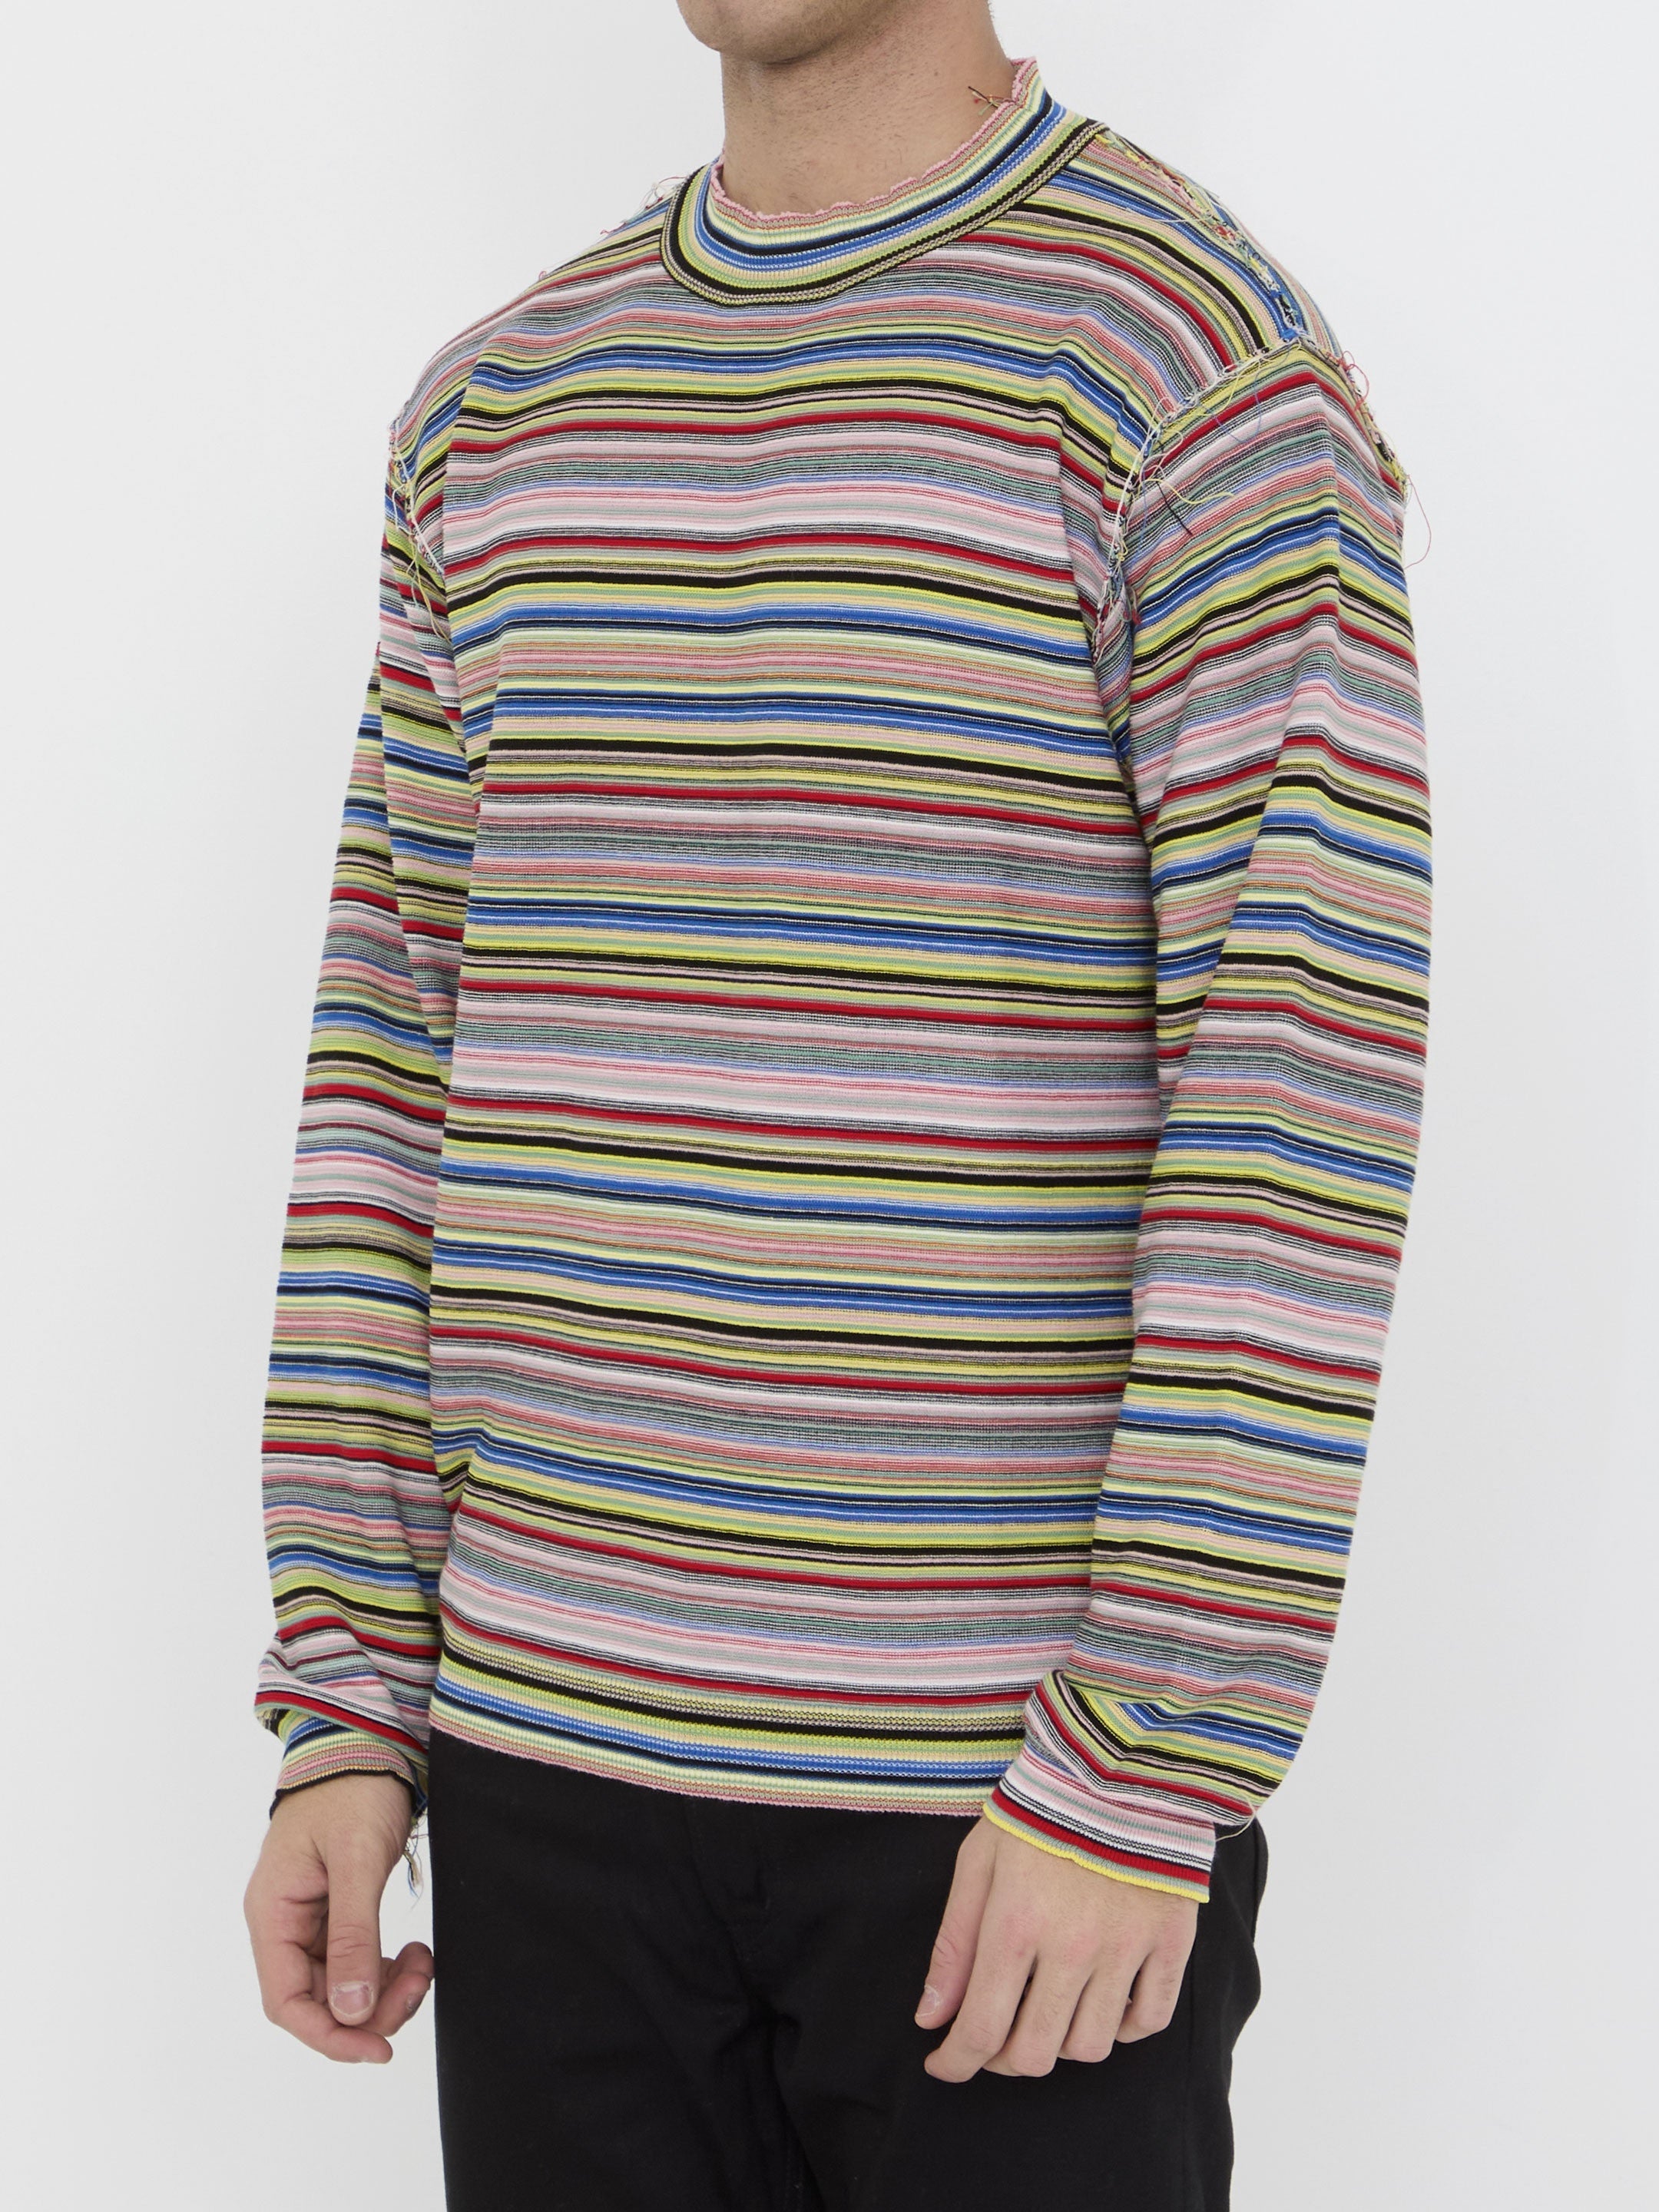 MAISON-MARGIELA-OUTLET-SALE-Striped-top-Shirts-ARCHIVE-COLLECTION-2.jpg